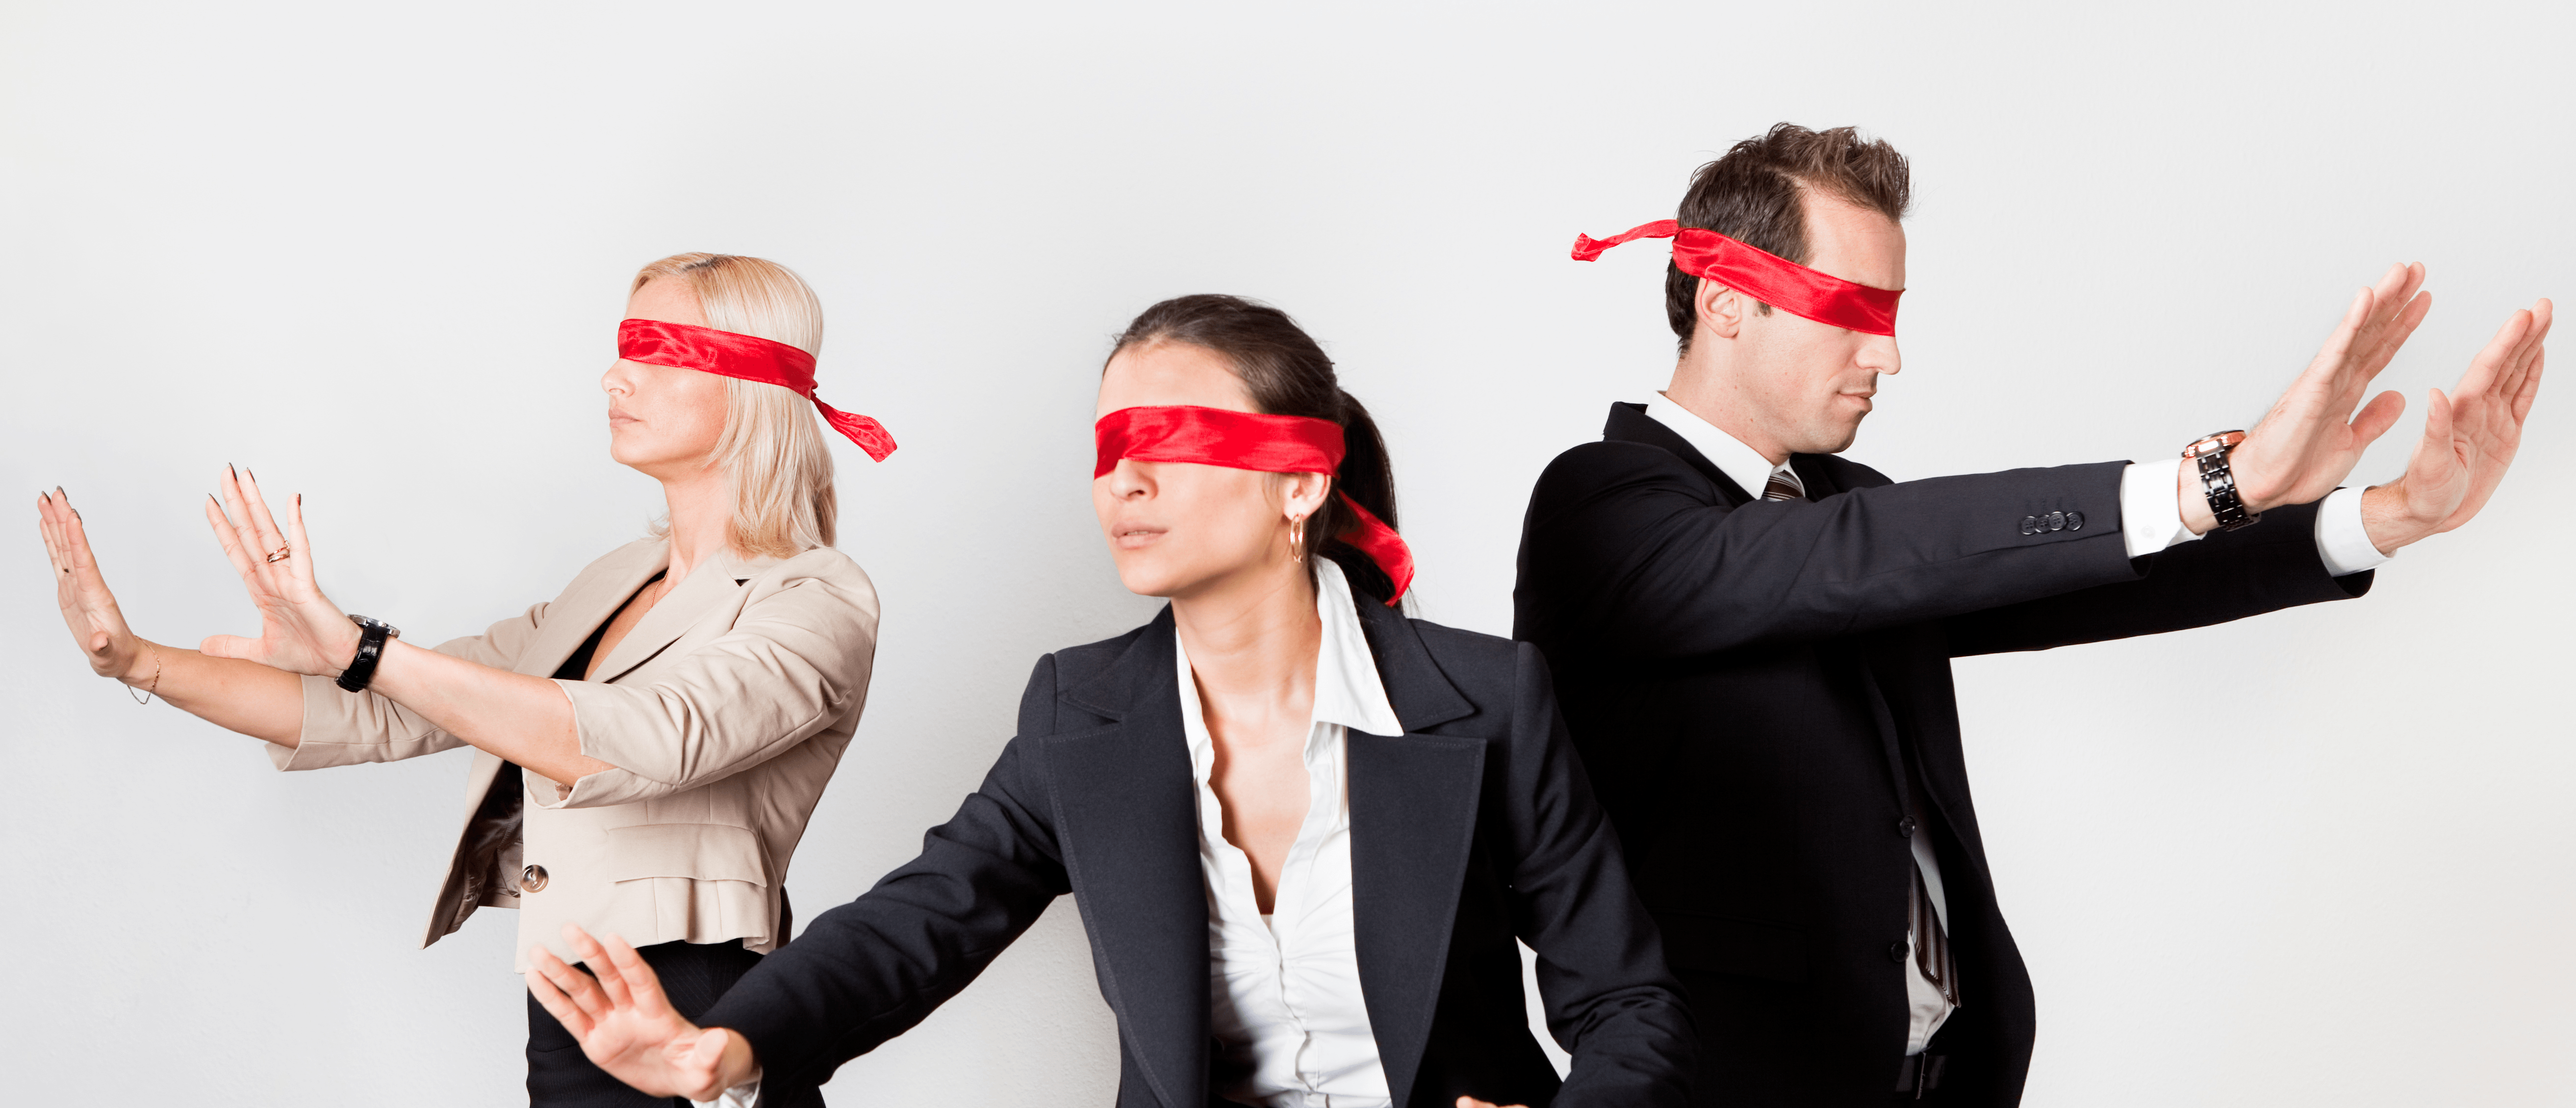 Beskrivning för "When Looking at Your Business, Do Not Have a Blindfold On!"